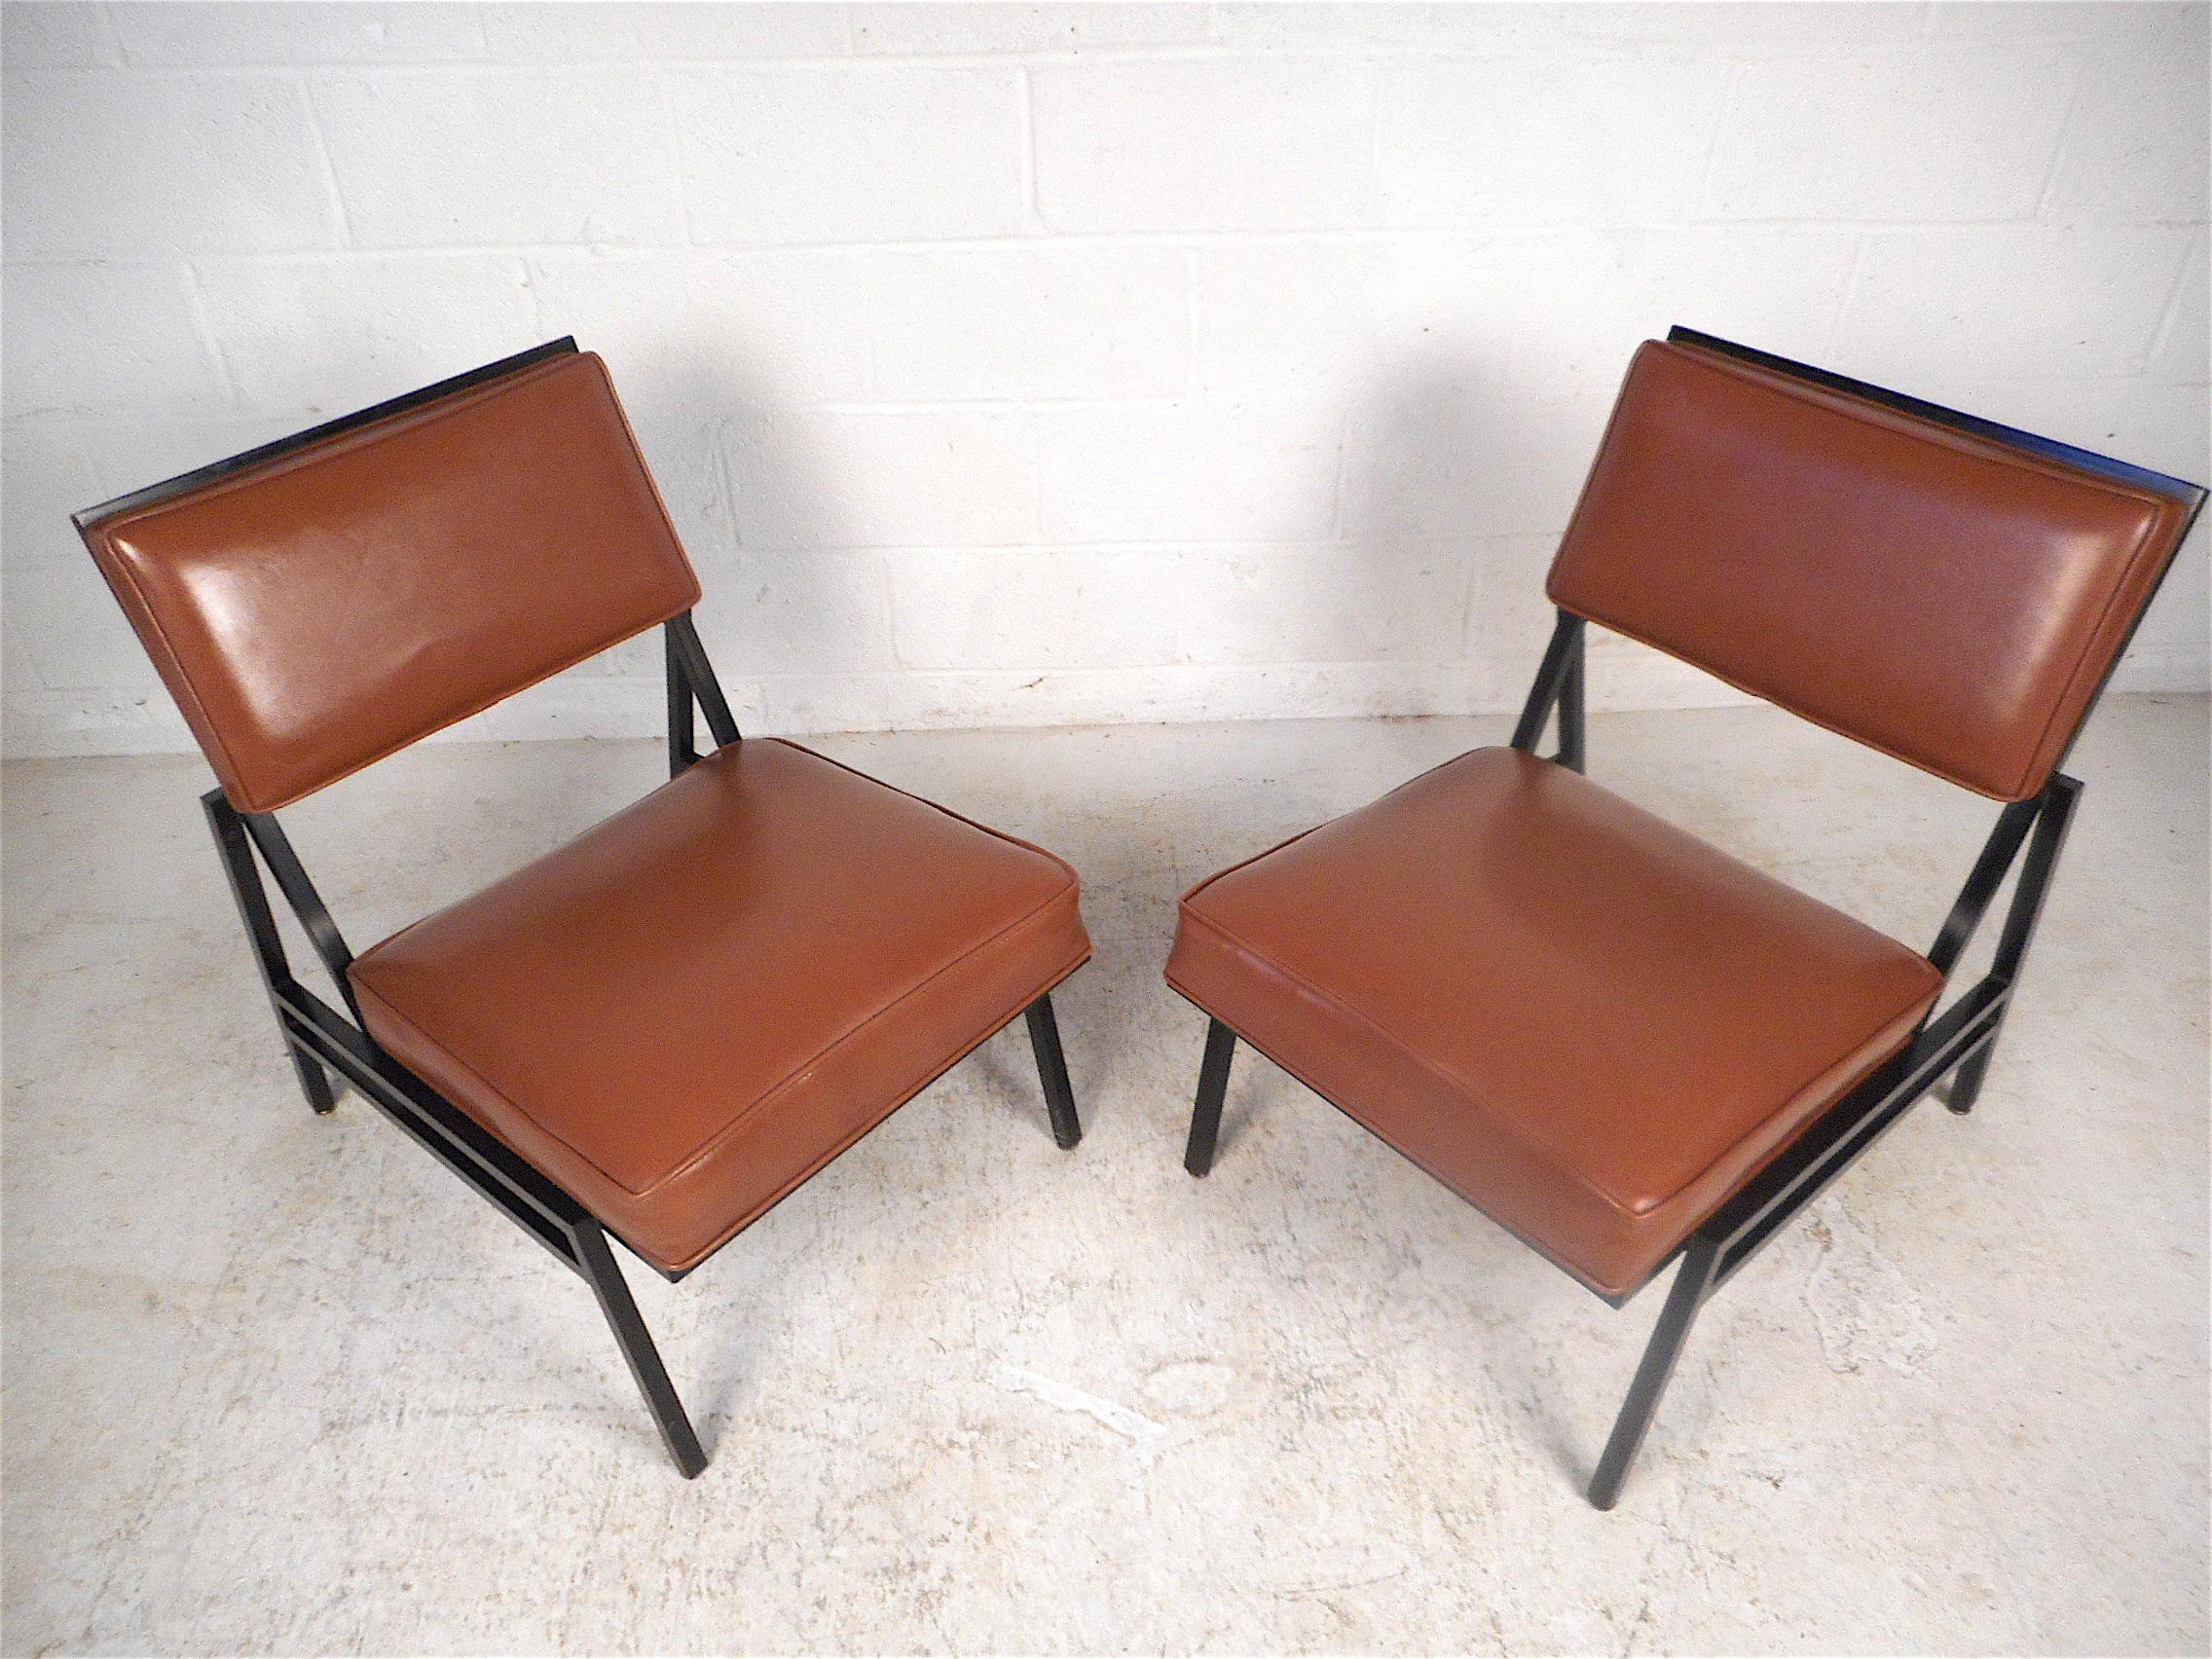 Stylish Mid-Century Modern lounge chairs by Steelcase Inc. Sleek angular design reminiscent of Florence Knoll. Sturdy metal frames support spacious seating areas which are covered in a vintage faux-leather upholstery. This pair is sure to prove a